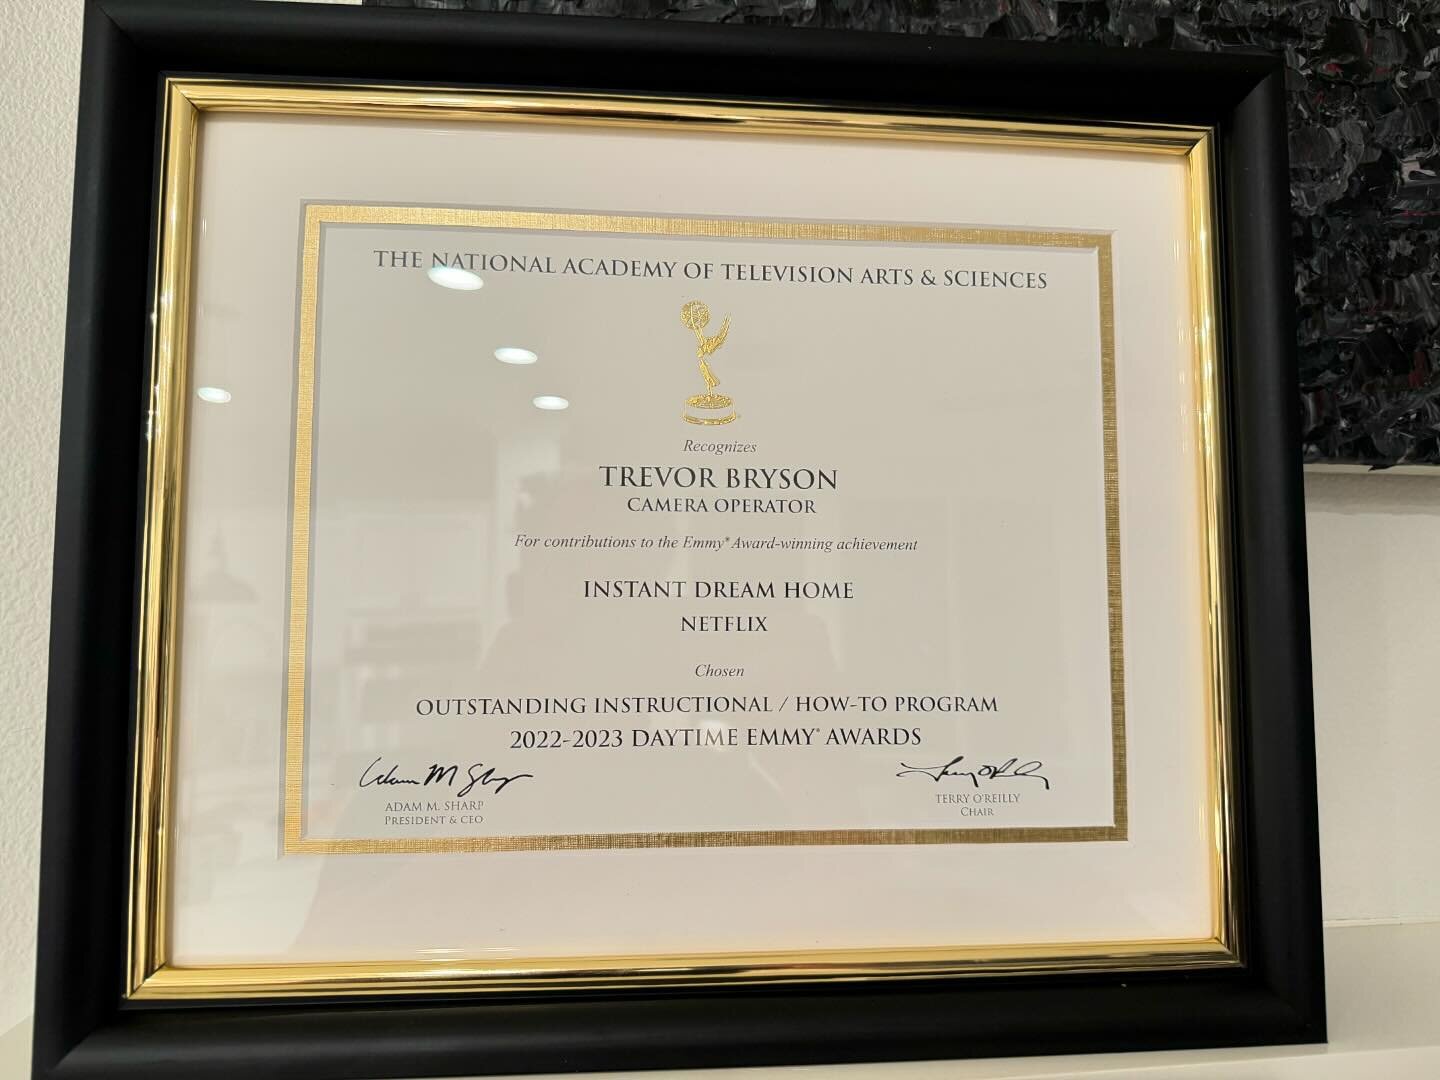 Glide Aerials can now proudly say we have won an Emmy. Such an honor and a pleasure to work with everyone on the big hit @instantdreamhome under the direction of @redskytony and the producers we knocked it out of the park making some really incredibl